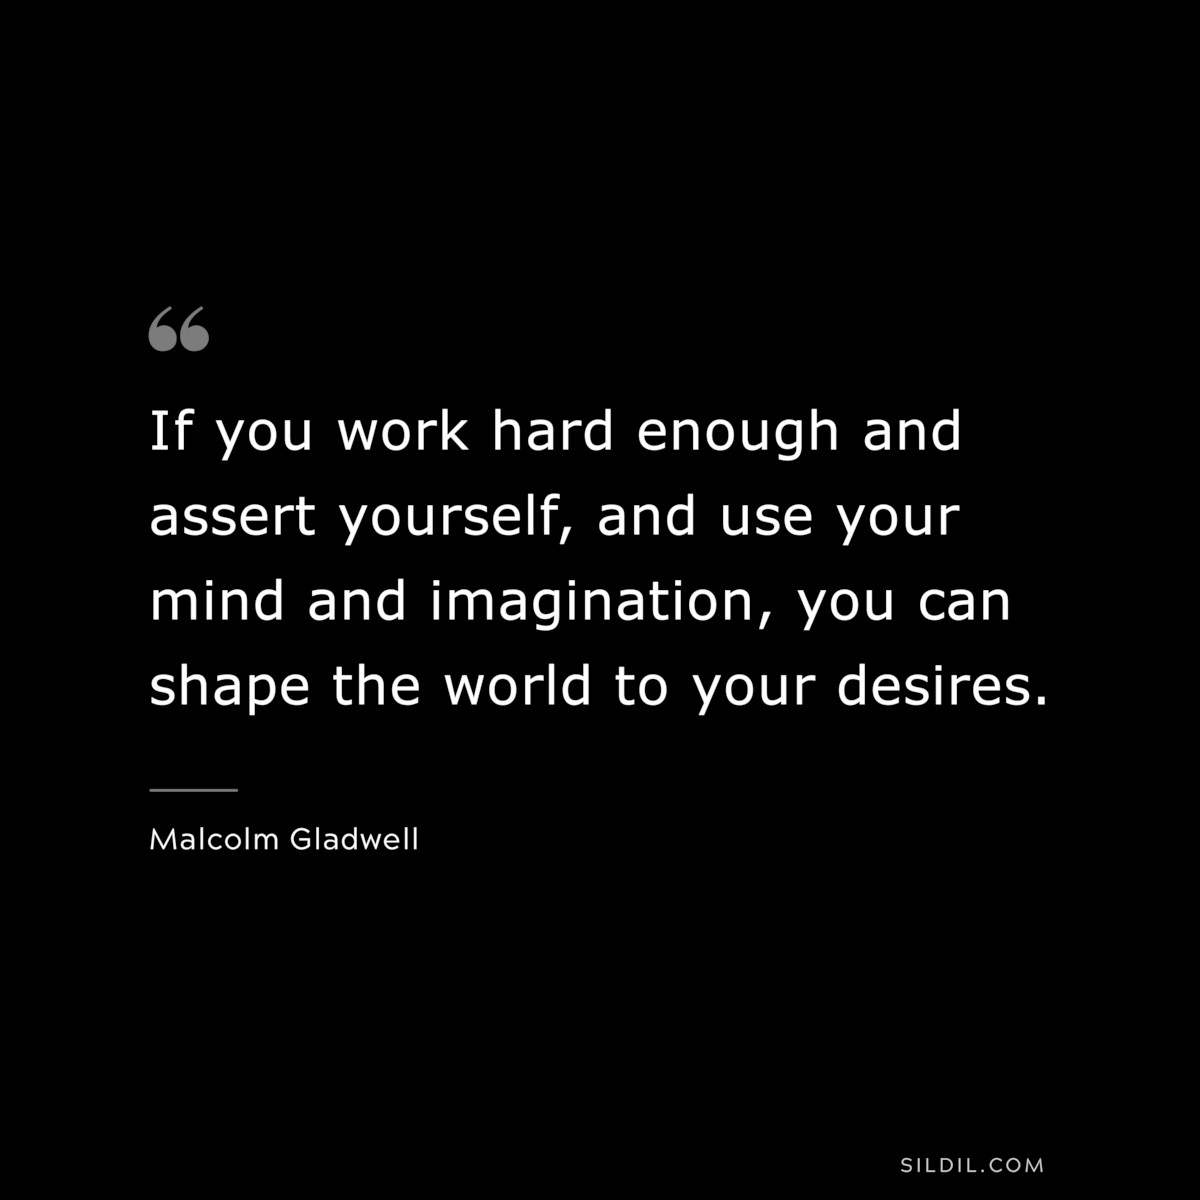 If you work hard enough and assert yourself, and use your mind and imagination, you can shape the world to your desires. ― Malcolm Gladwell